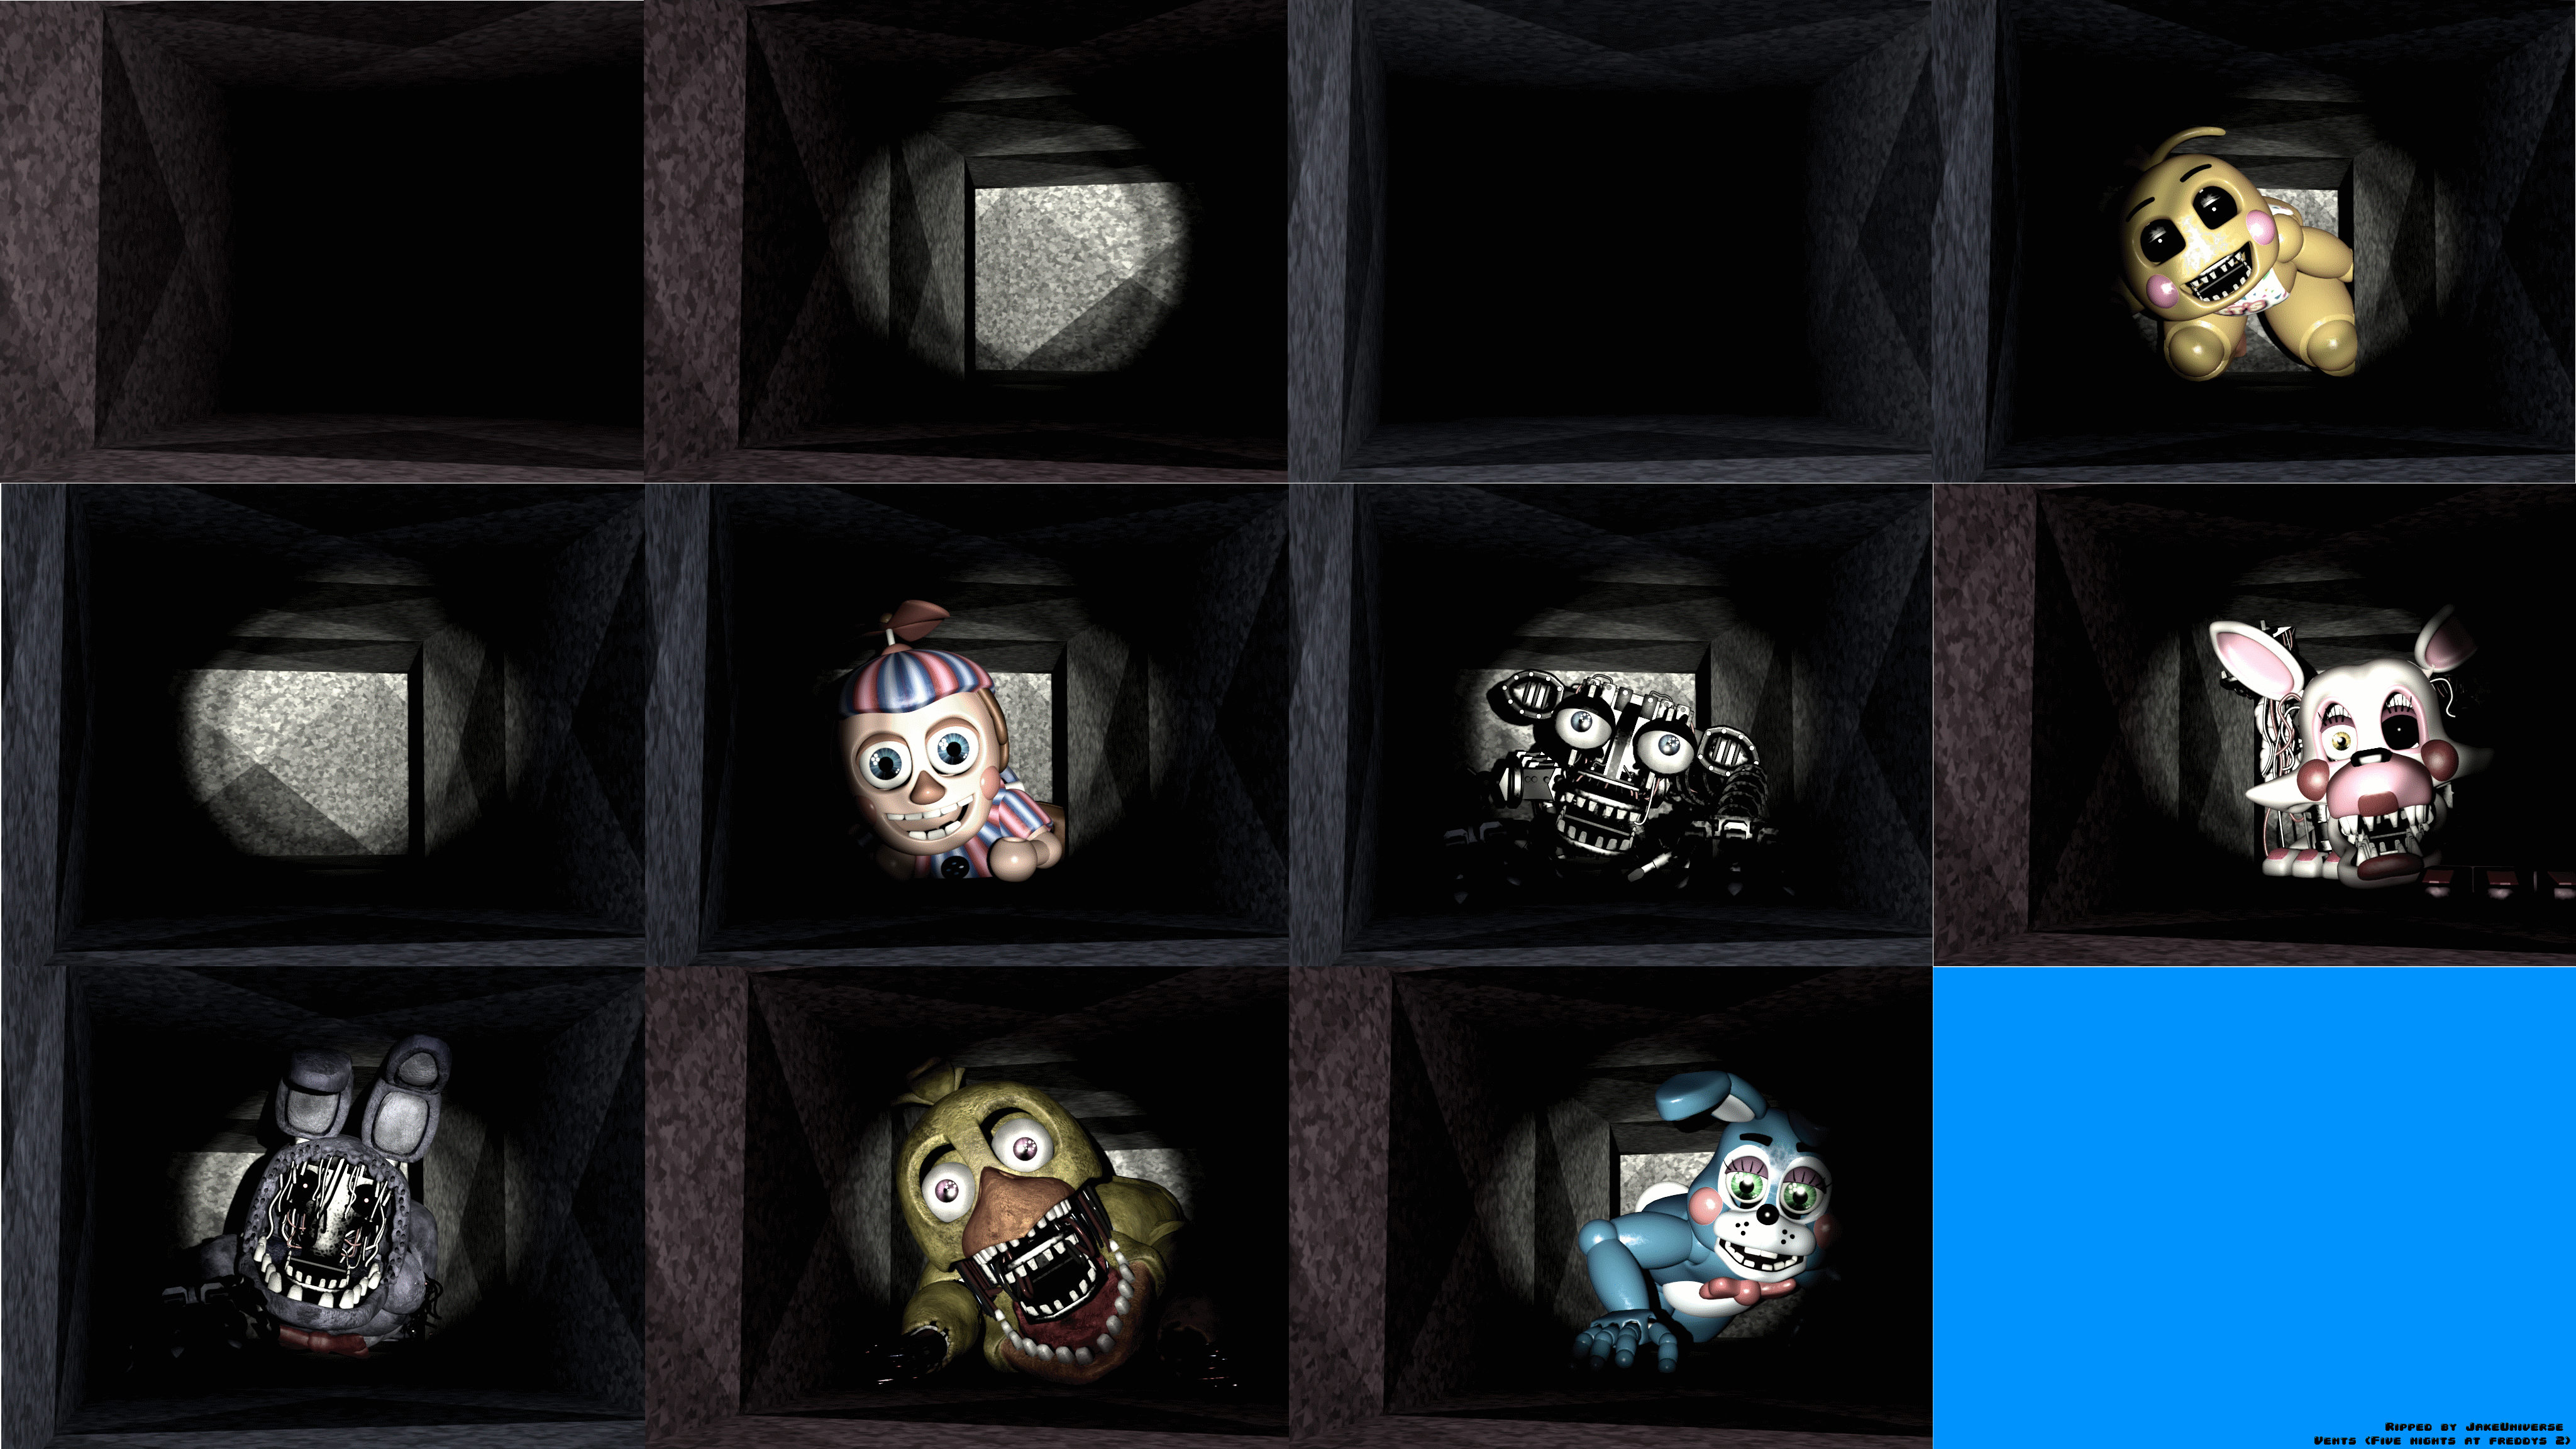 PC / Computer - Five Nights at Freddy's - The Spriters Resource